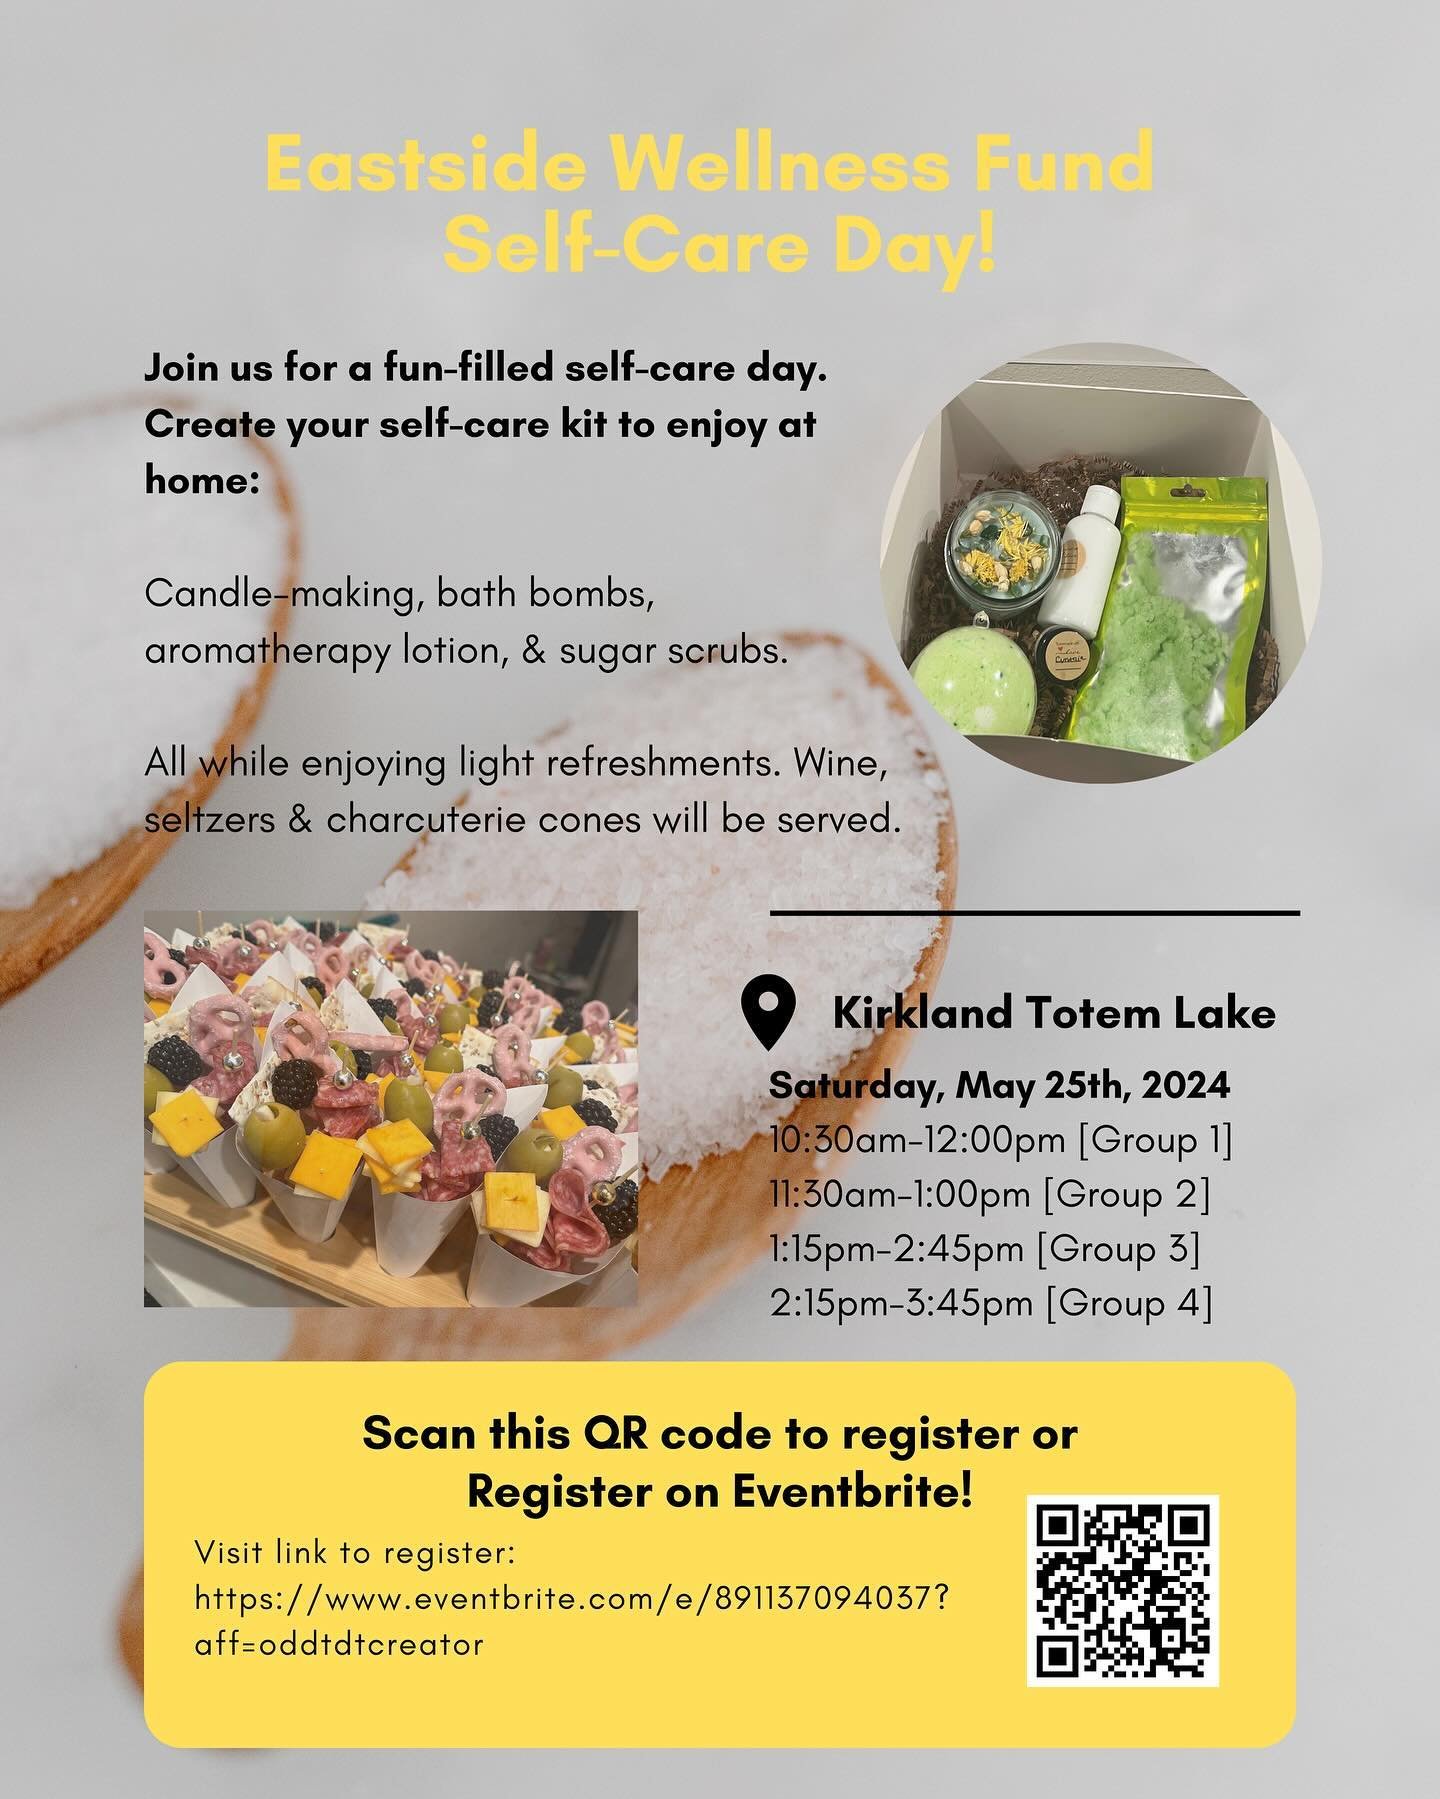 Treat yourself to a day of self-care with Eastside Wellness Fund this Mental Health Awareness Month! ✨

Self-care is all about nurturing your well-being and enhancing your health. Come indulge in a day filled with fun activities, including creating y